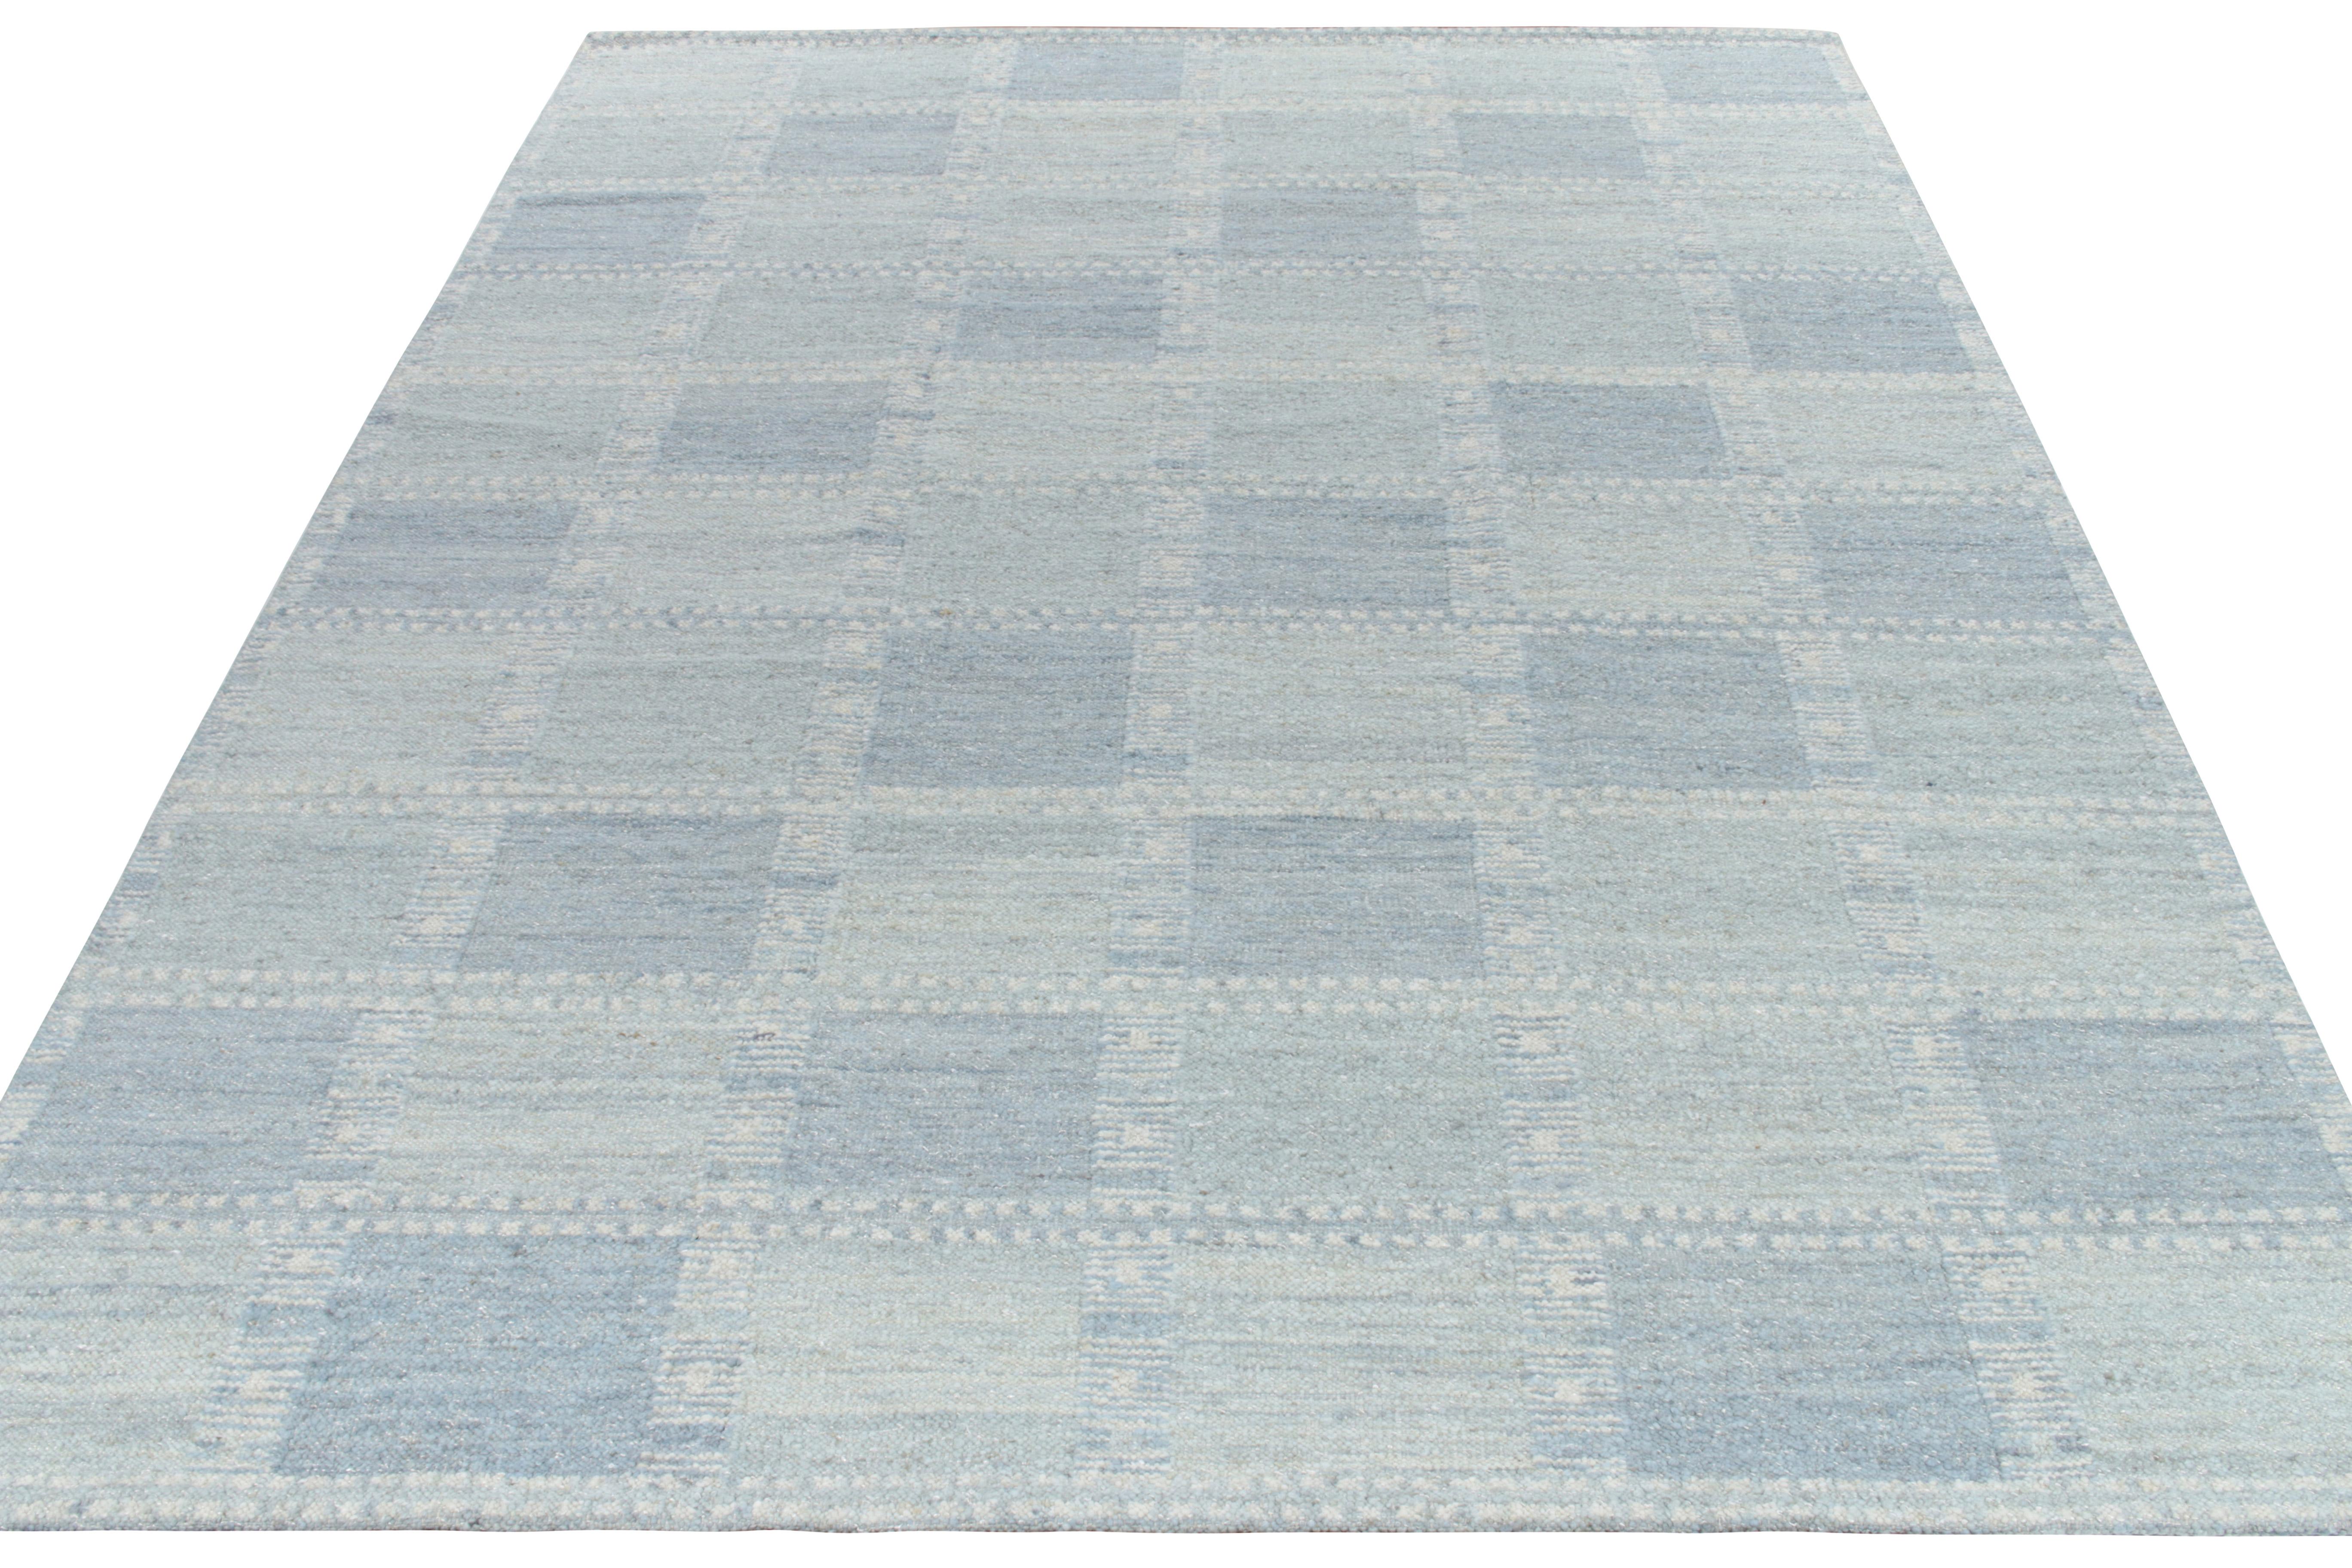 Handwoven in fine quality yarn, a 10x14 flatweave from our Scandinavian Nu collection connoting Swedish sensibilities with a neat geometric pattern sitting comfortably in gorgeous symmetry flourishing in blue gradiance. Clean & refreshing, a